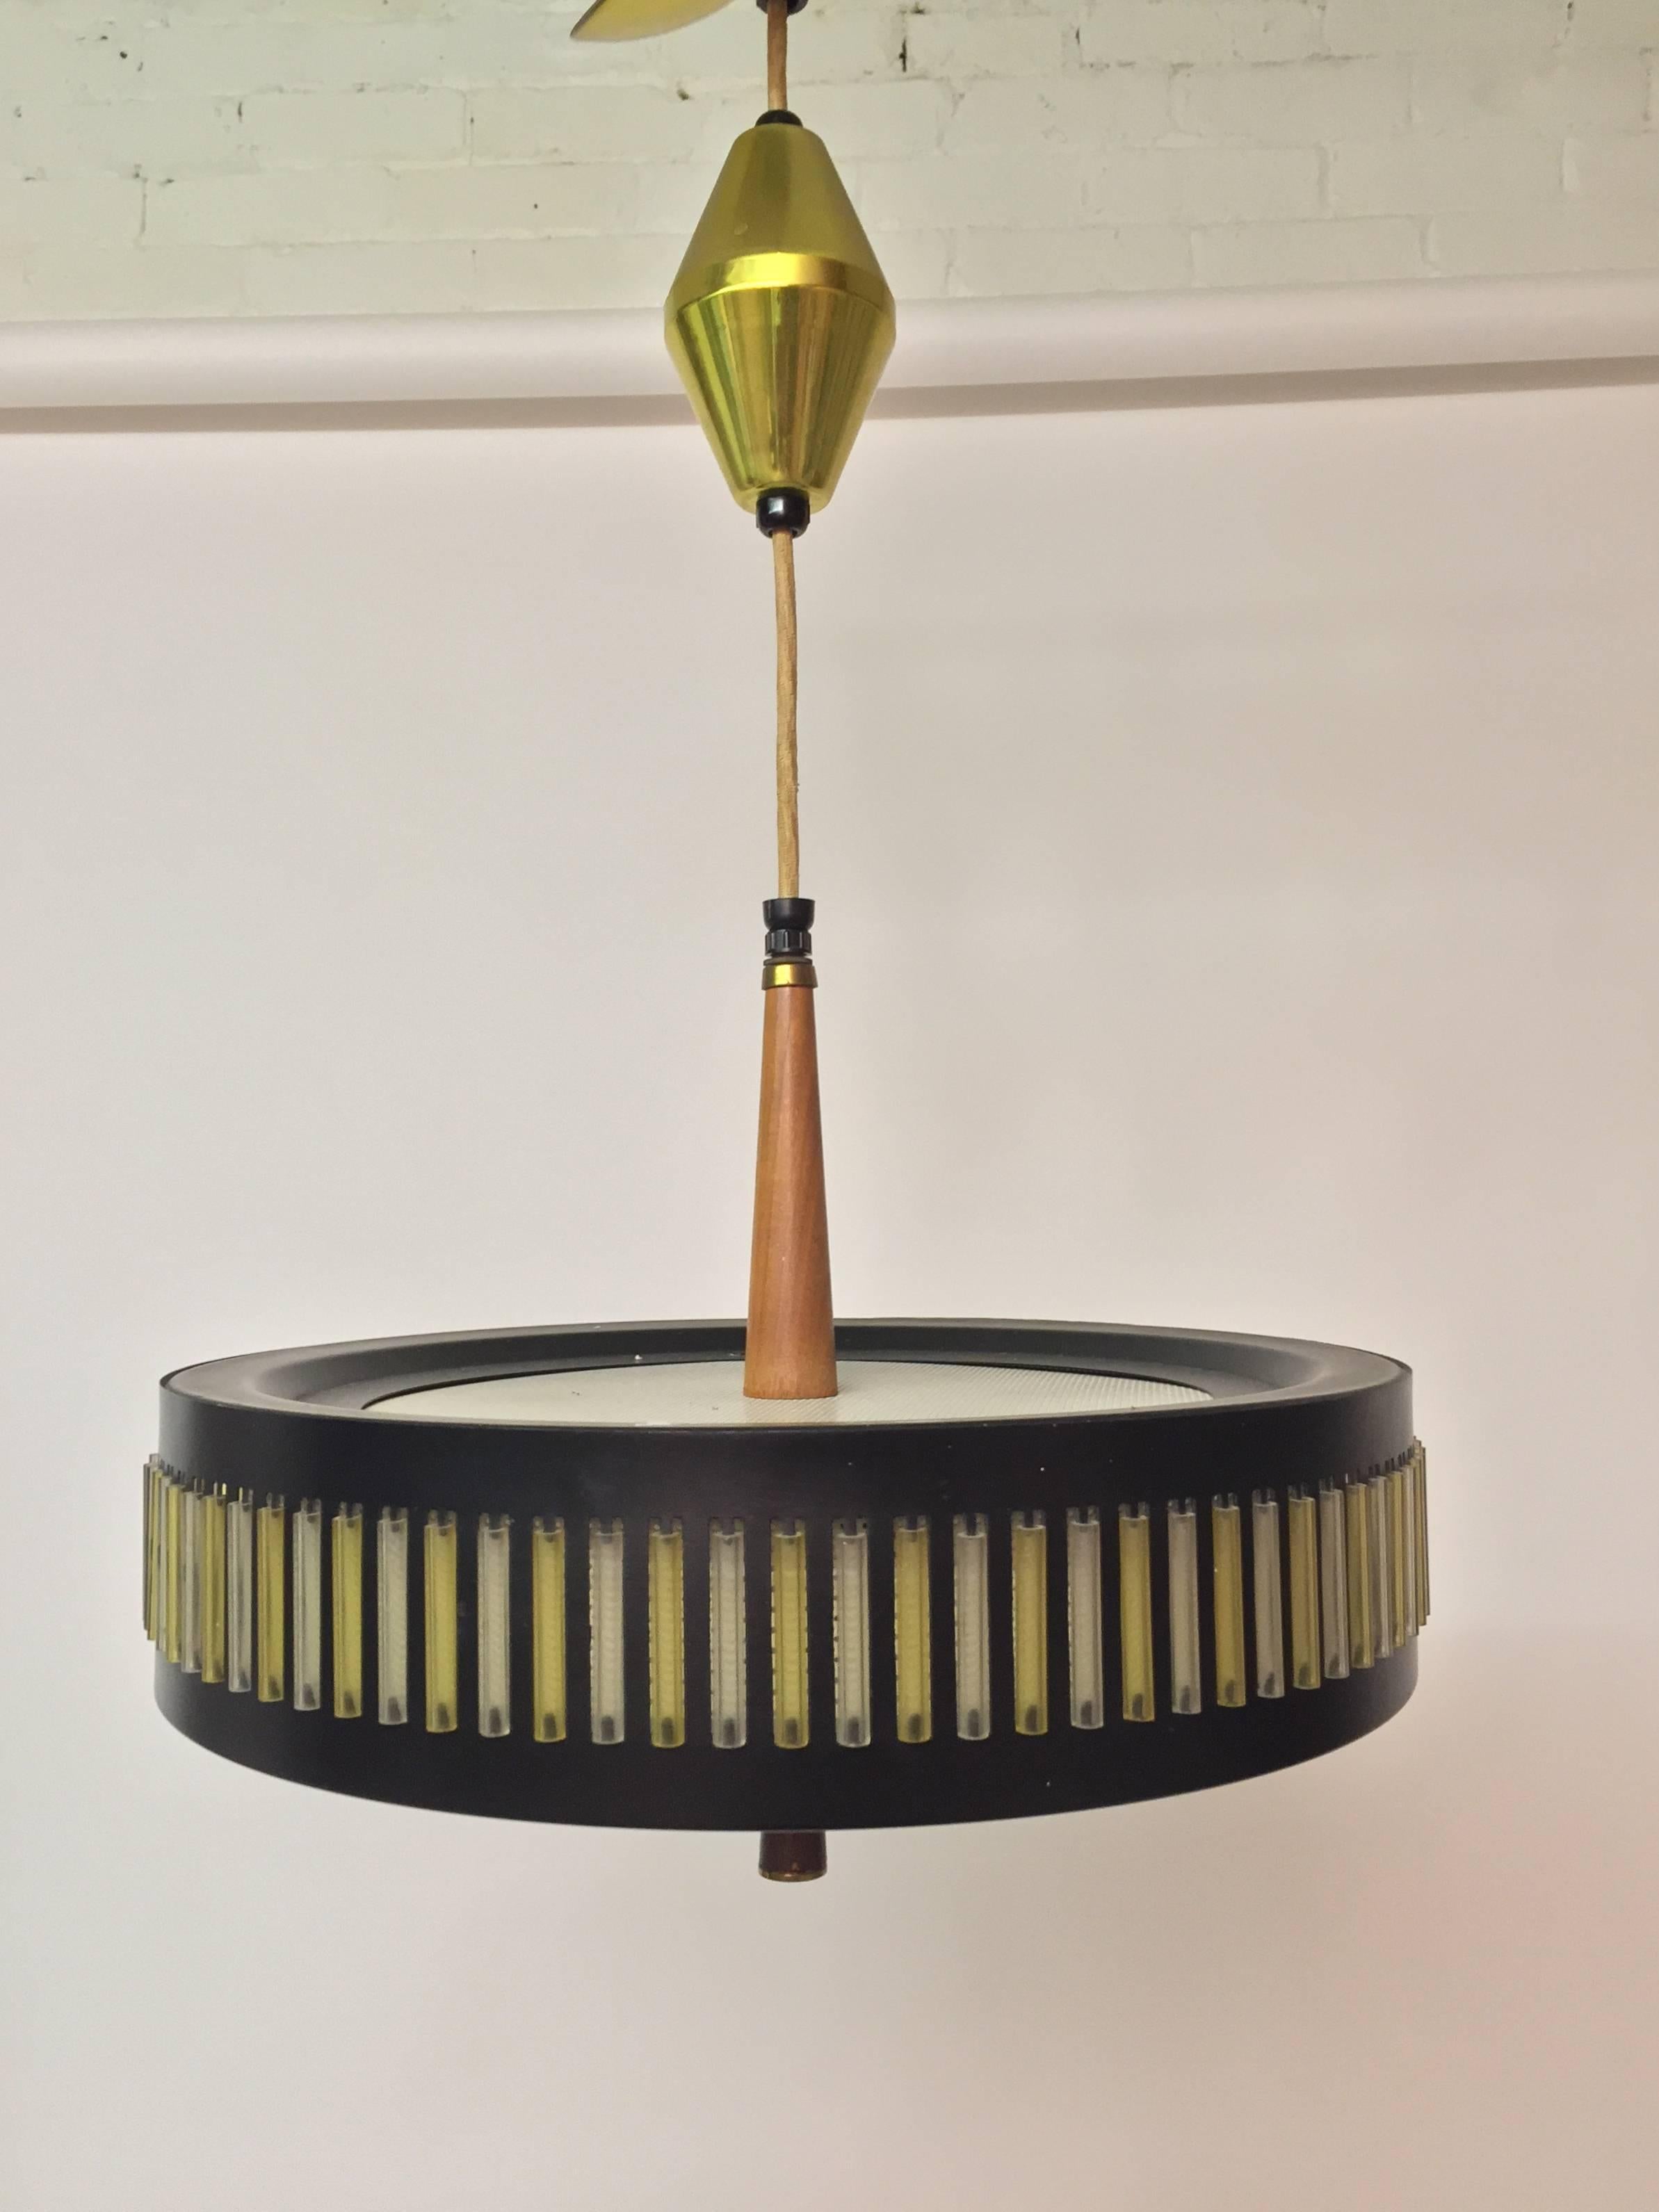 Classic Mid-Century Modern drop light fixture from Globe Lighting Products. The height is fully adjustable. All original details include the glass diffuser, solid walnut accents and yellow and clear plastic cylinders. Old fabric cord. 14